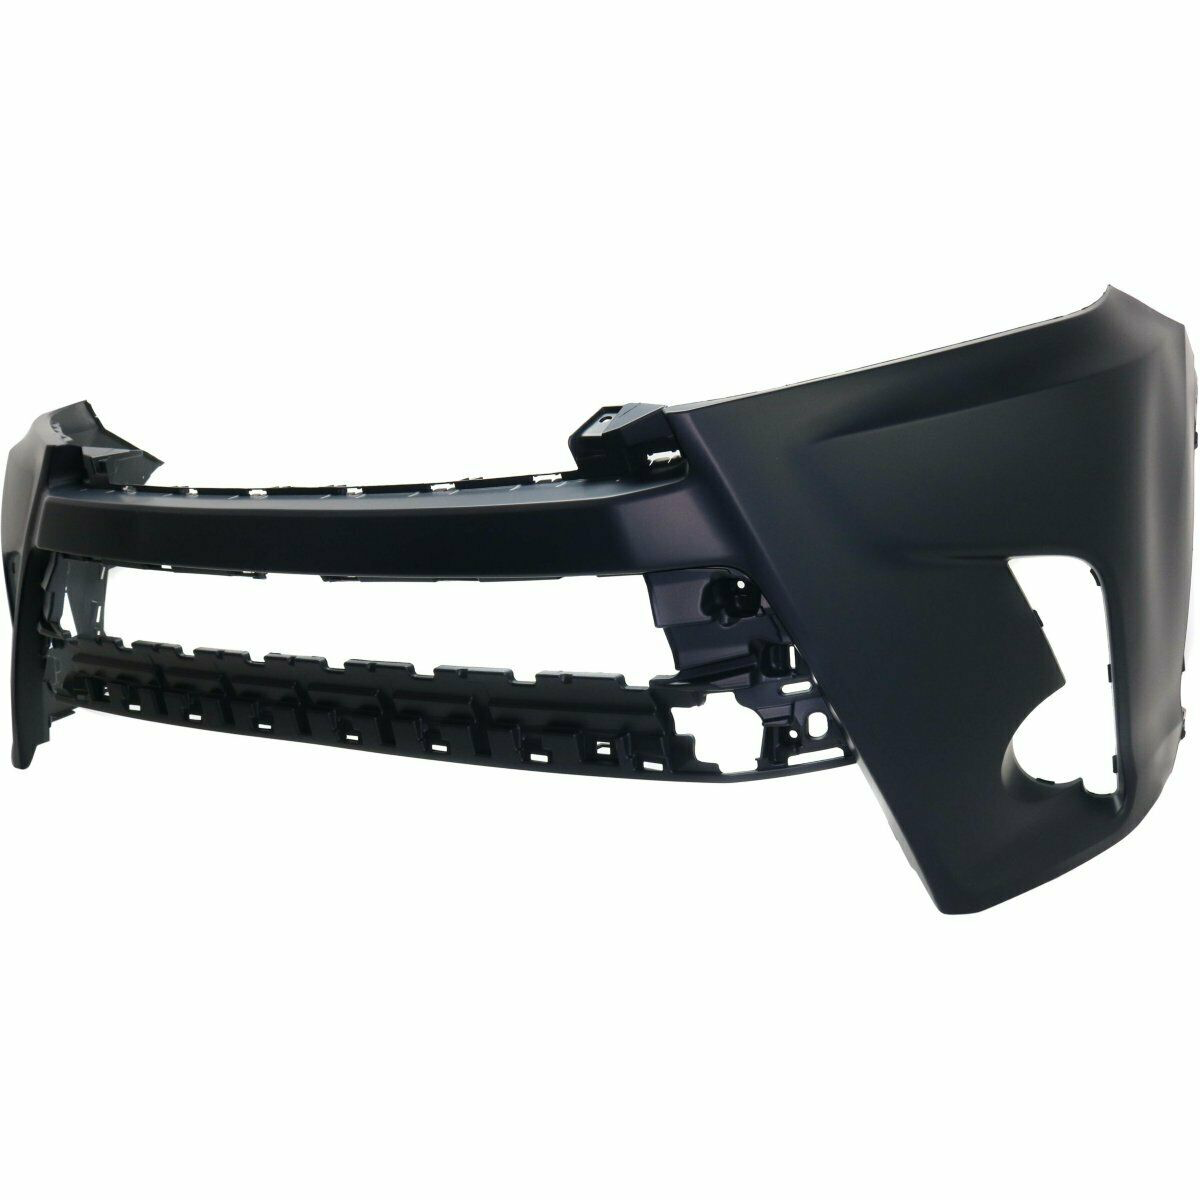 2017-2019 Toyota Highlander Front Bumper Painted to Match